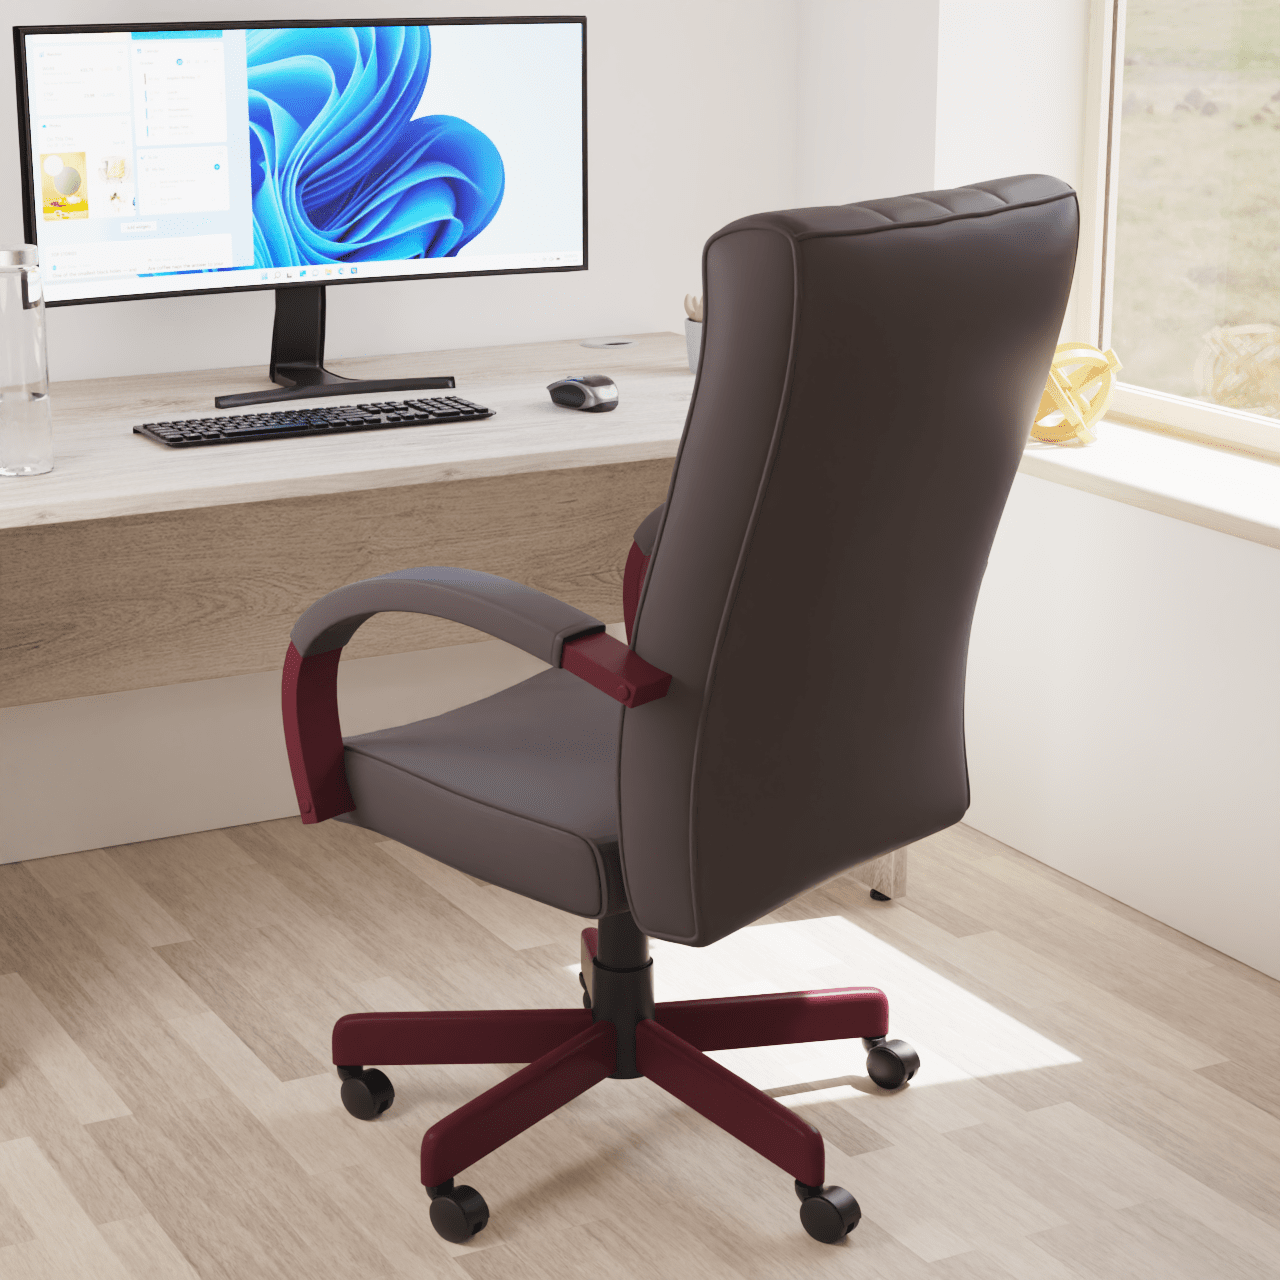 Chesterfield High Back Executive Office Chair - Soft Bonded Leather, Wooden Frame, 110kg Capacity, 8hr Usage, Gas Height Adjustment